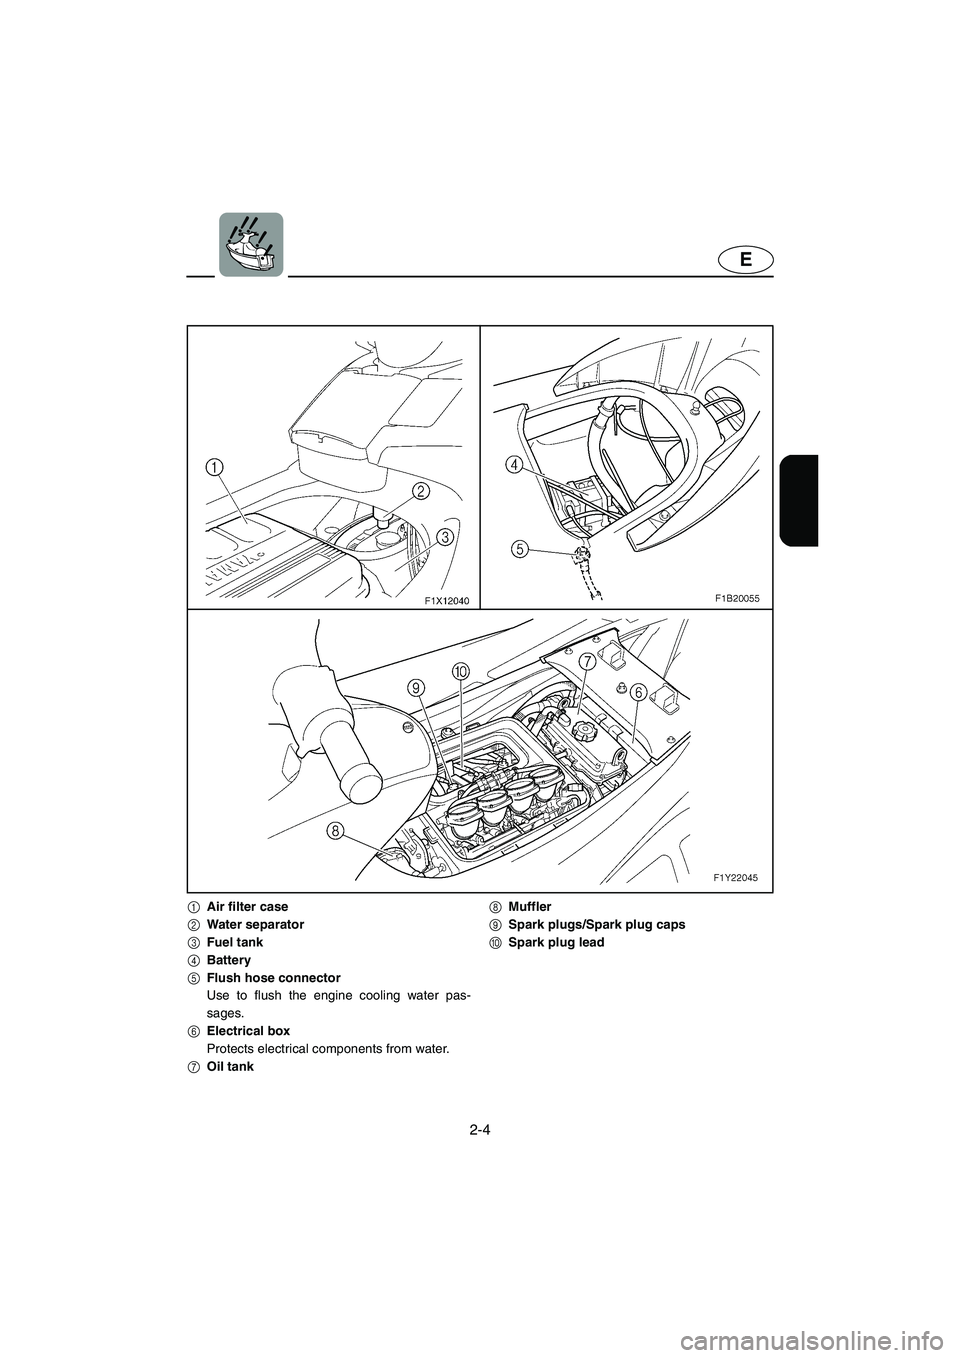 YAMAHA FX CRUISER 2006  Owners Manual 2-4
E
1Air filter case
2Water separator
3Fuel tank
4Battery
5Flush hose connector
Use to flush the engine cooling water pas-
sages.
6Electrical box
Protects electrical components from water.
7Oil tank